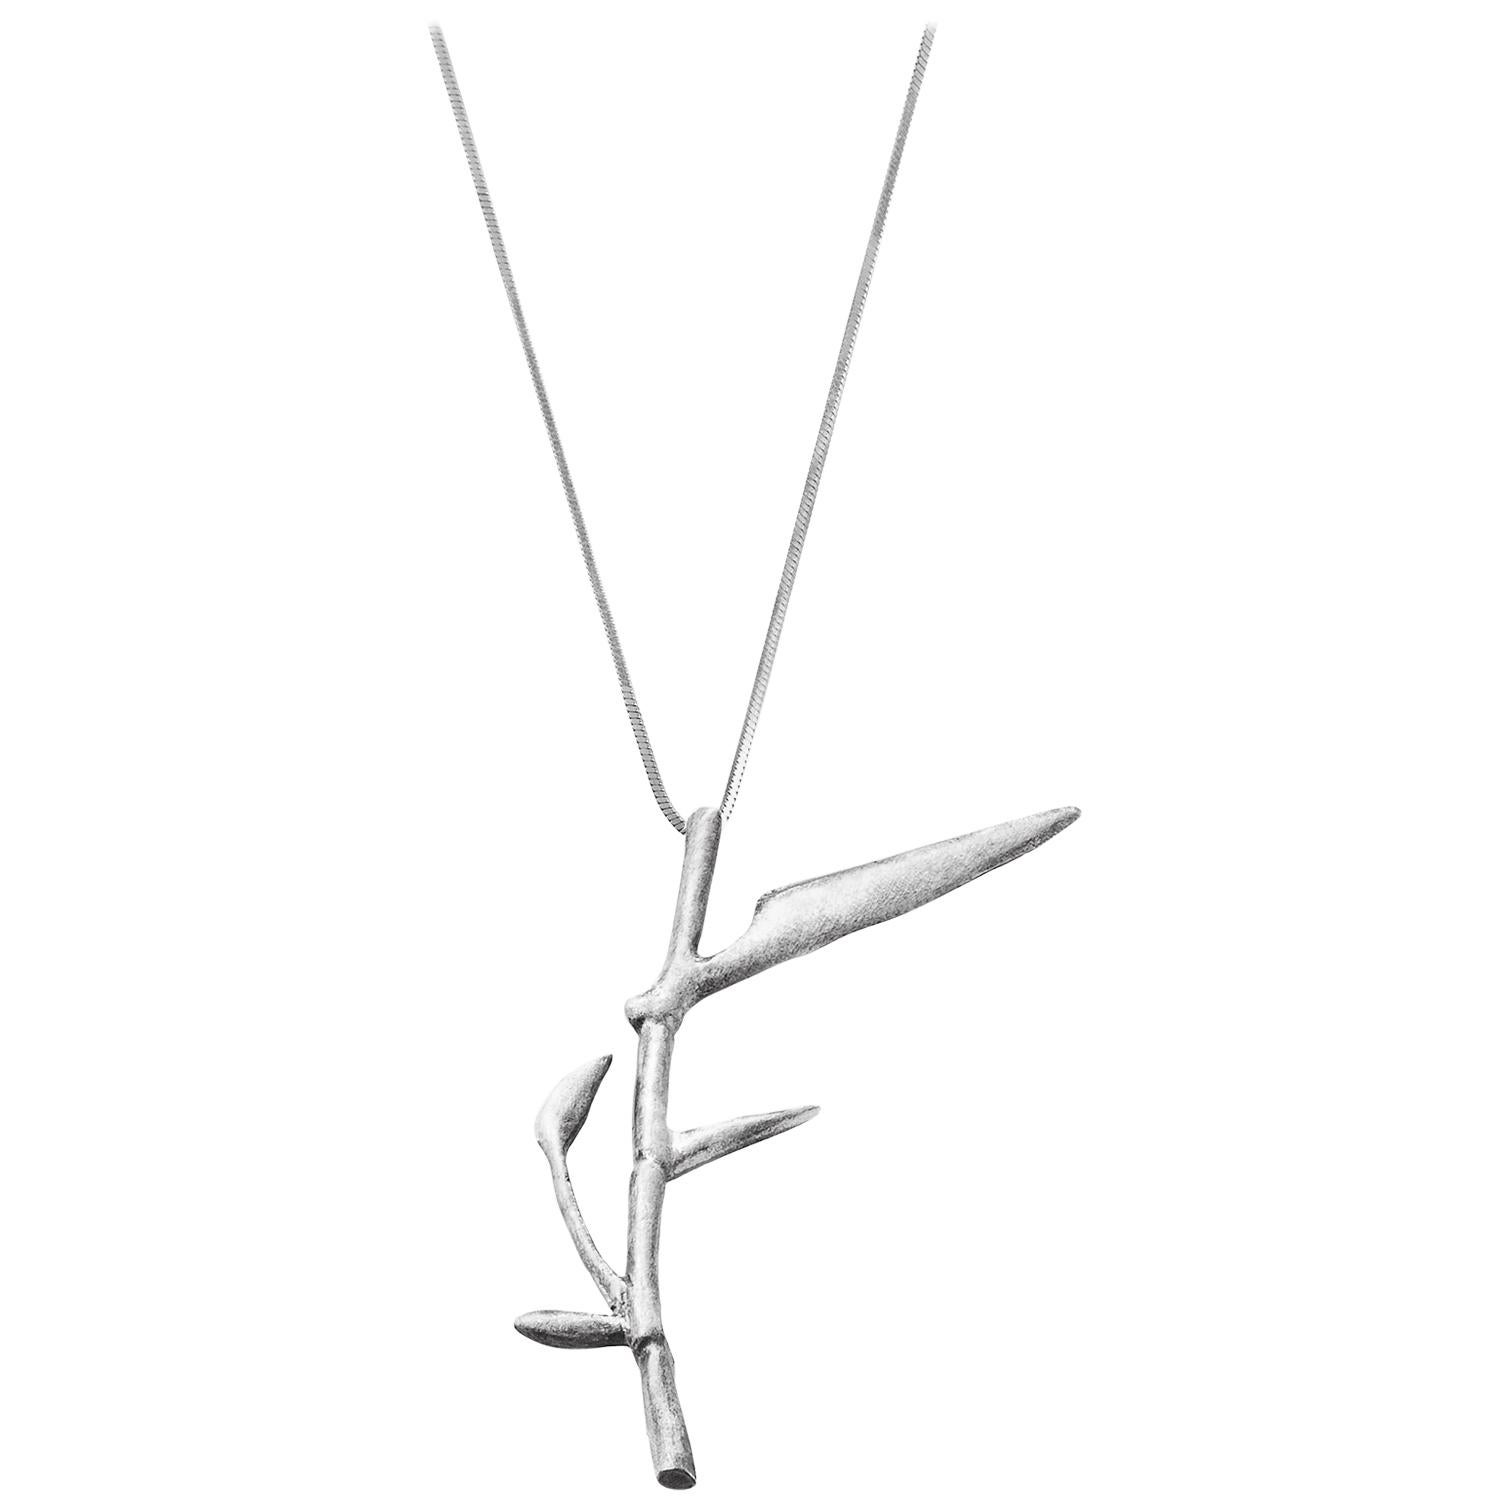 Bamboo Garden Pendant in Sterling Silver N3 by the Artist